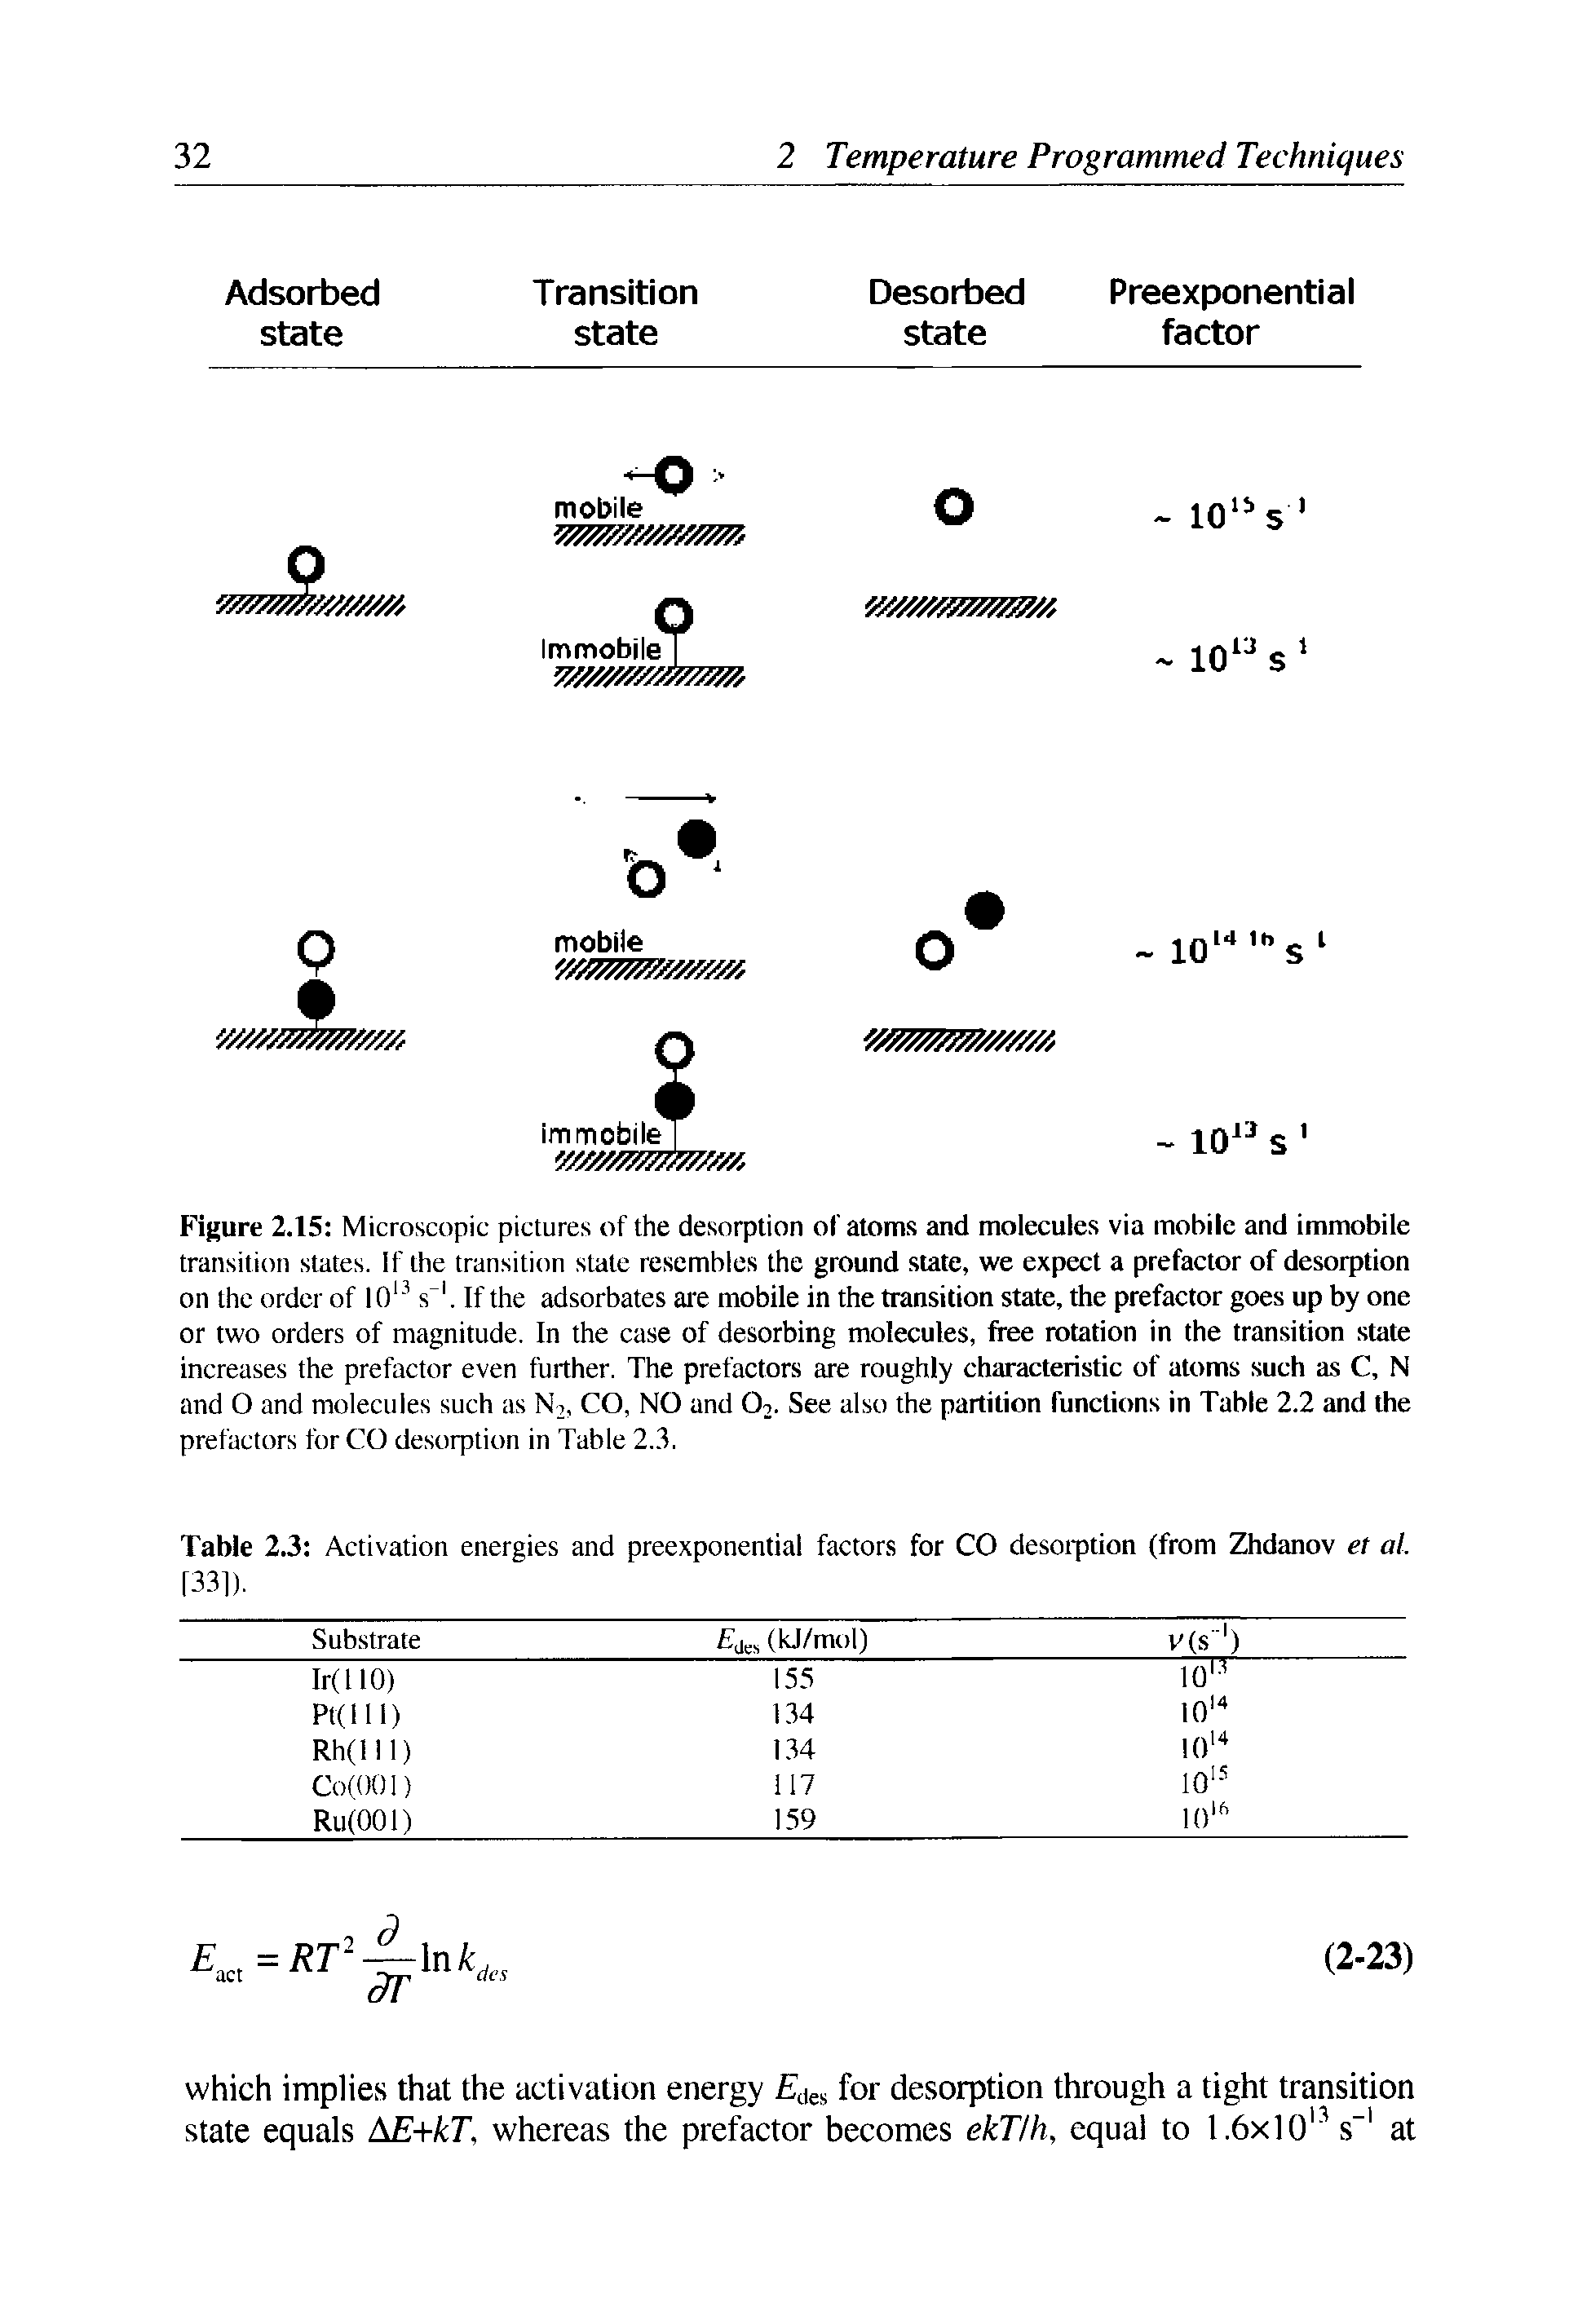 Figure 2.15 Microscopic pictures of the desorption of atoms and molecules via mobile and immobile transition states. If the transition state resembles the ground state, we expect a prefactor of desorption on the order of 1013 s. If the adsorbates are mobile in the transition state, the prefactor goes up by one or two orders of magnitude. In the case of desorbing molecules, free rotation in the transition state increases the prefactor even further. The prefactors are roughly characteristic of atoms such as C, N and O and molecules such as N2, CO, NO and 02. See also the partition functions in Table 2.2 and the prefactors for CO desorption in Table 2.3.